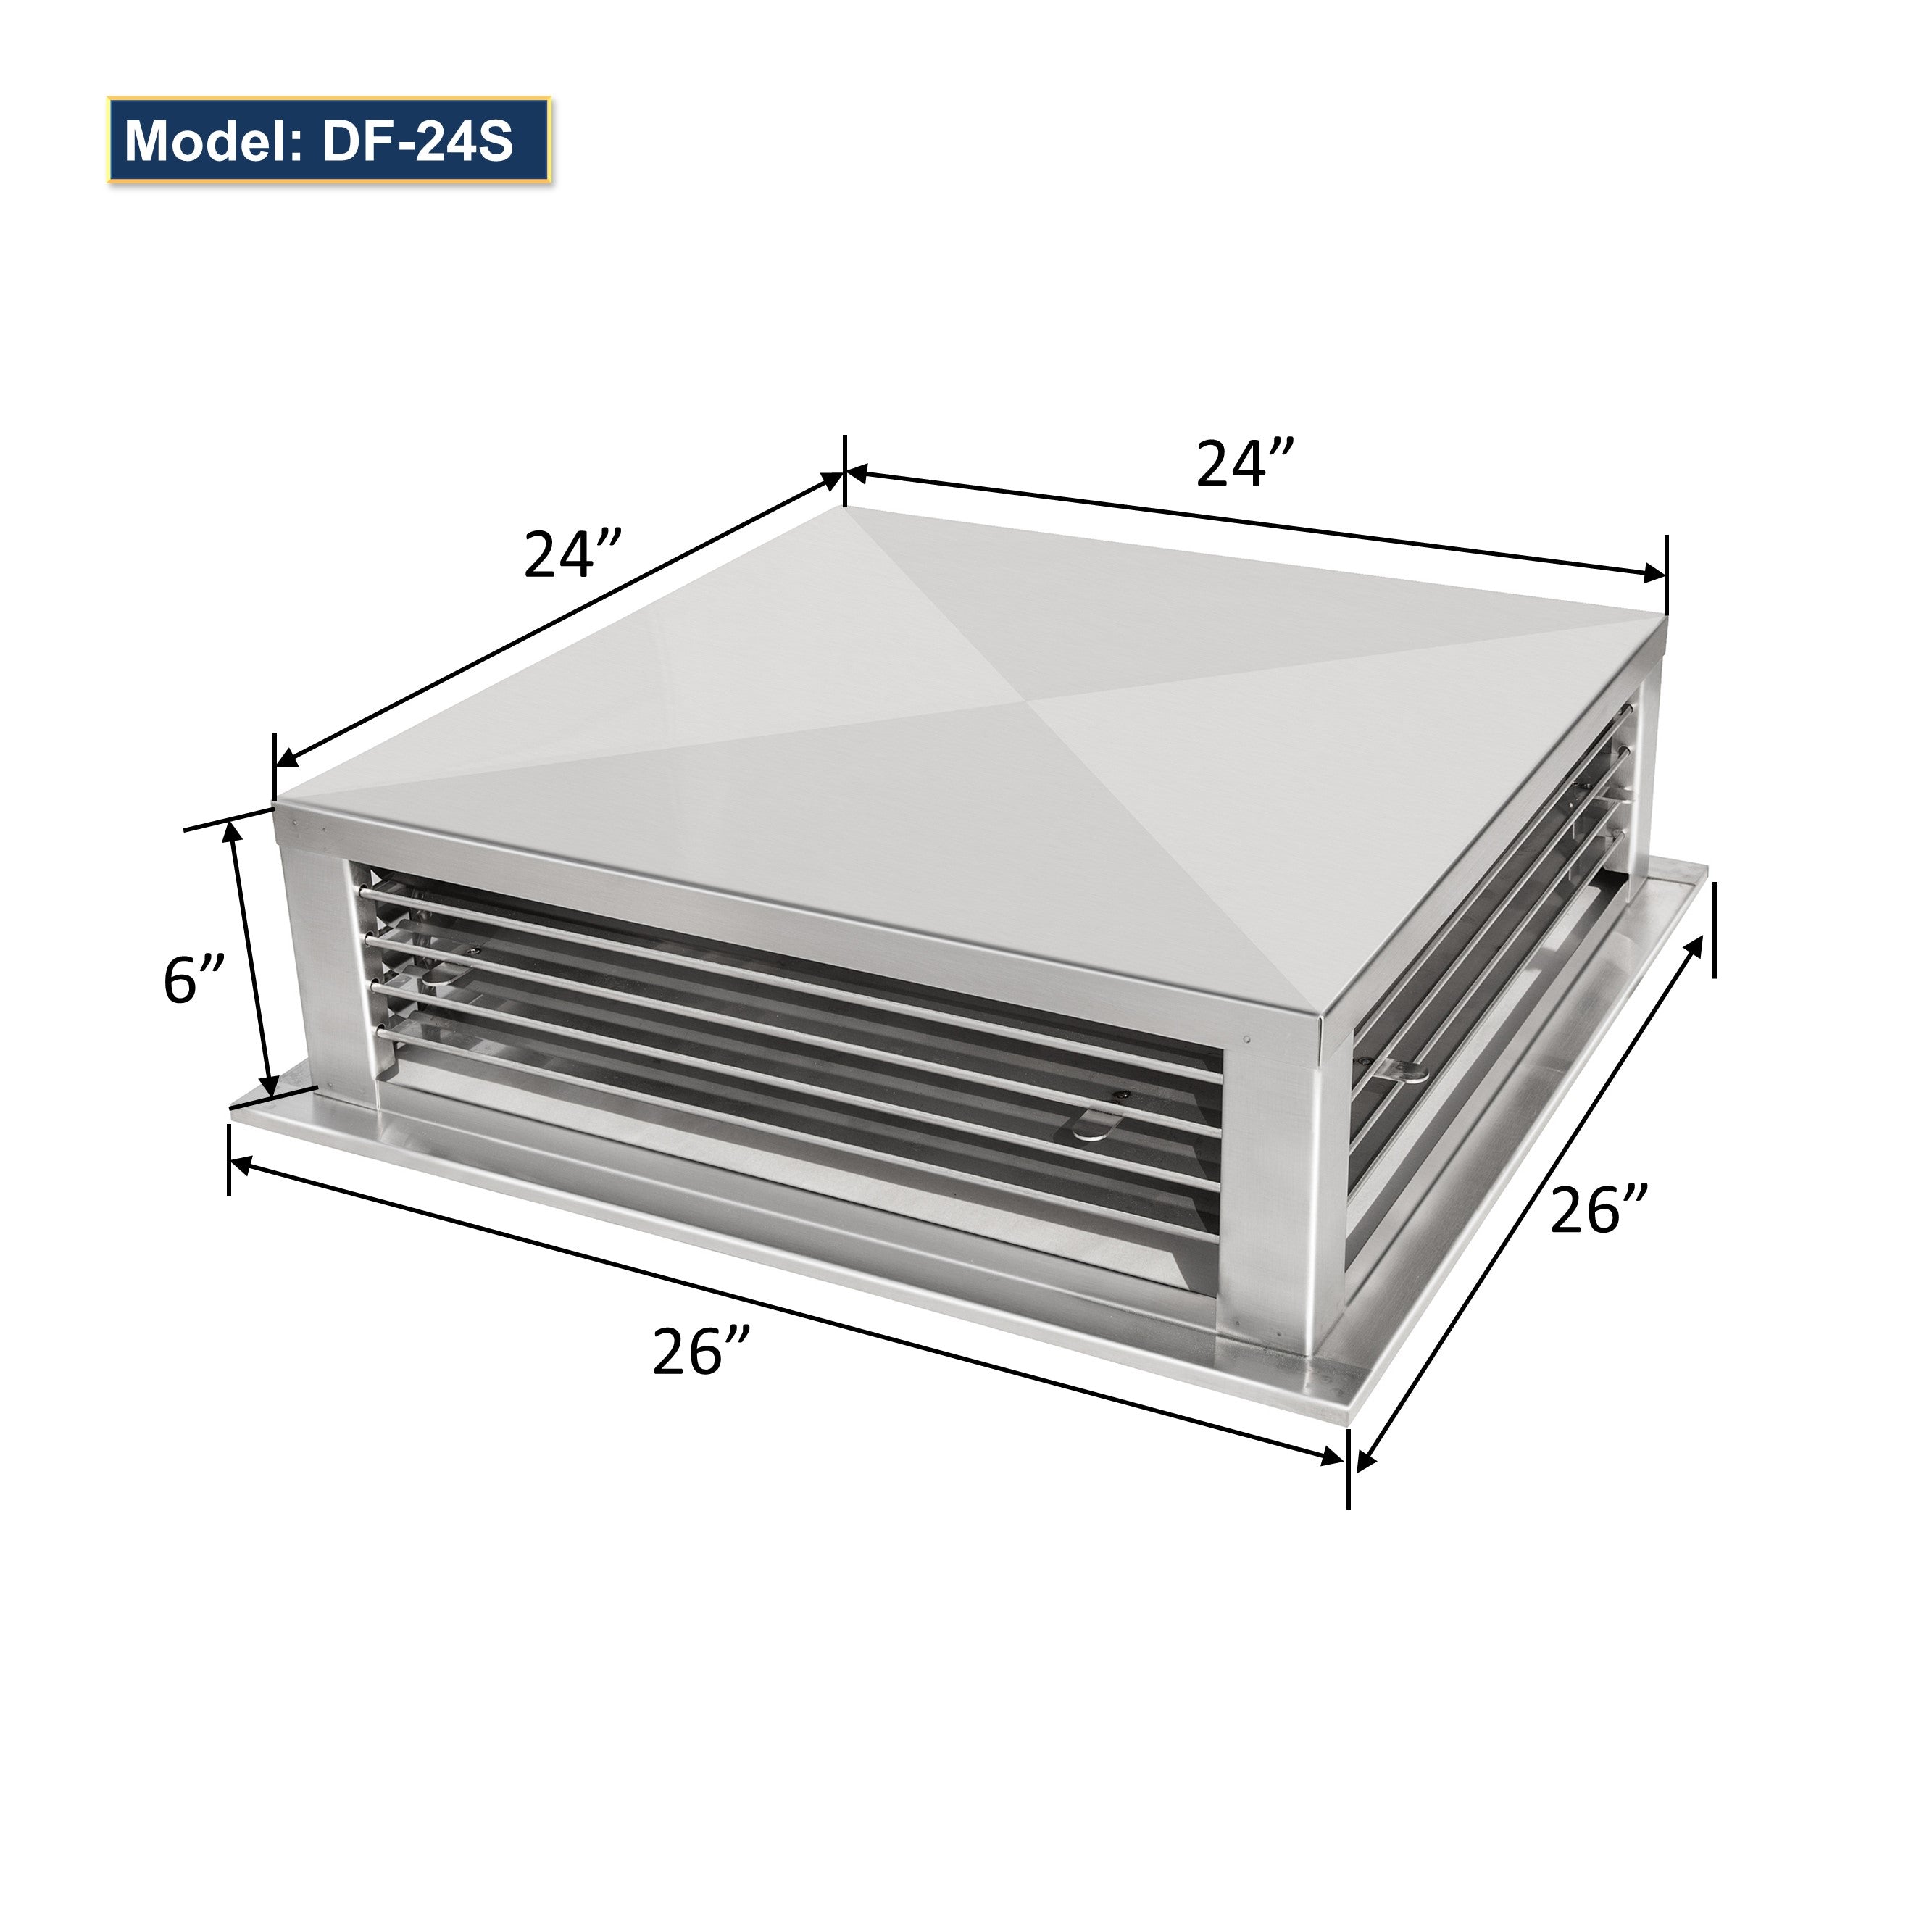 GSW 24” Stainless Steel 4-Way Adjustable Air Diffuser for Evaporative Swamp Cooler, 26” Mounting Edge (24"x24"x6")